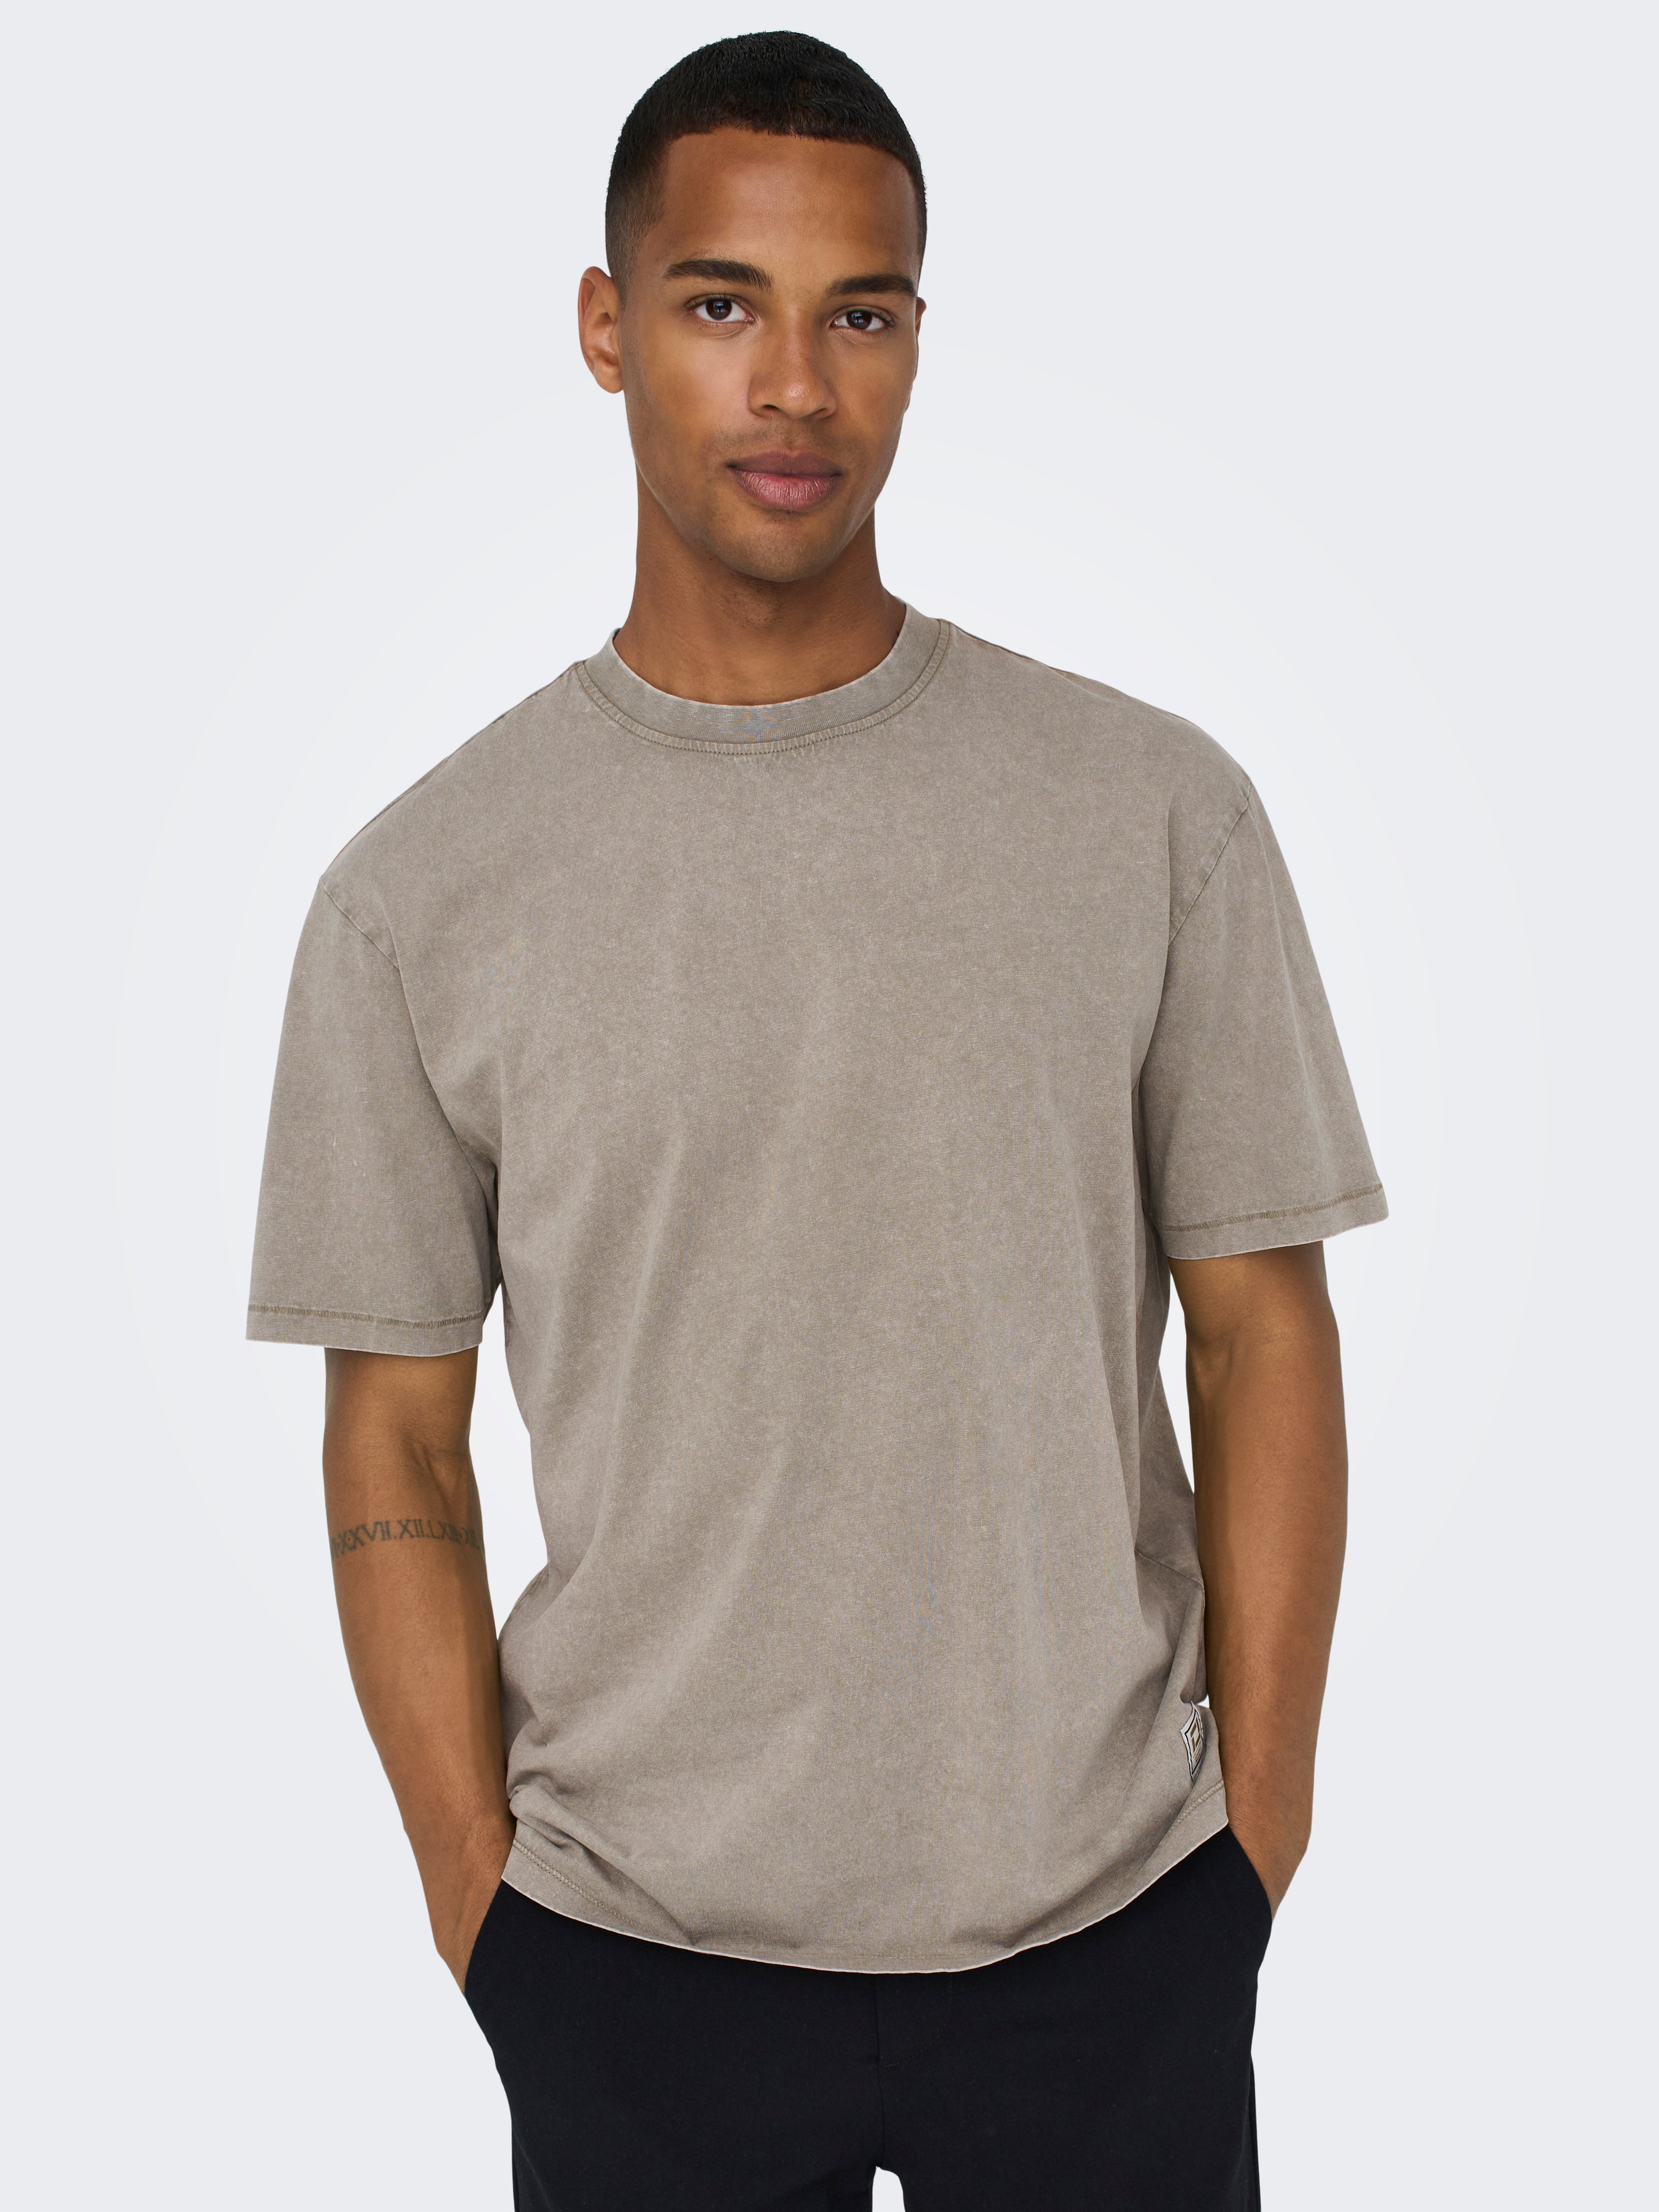 Trendy and Organic blank crop t shirt for All Seasons 